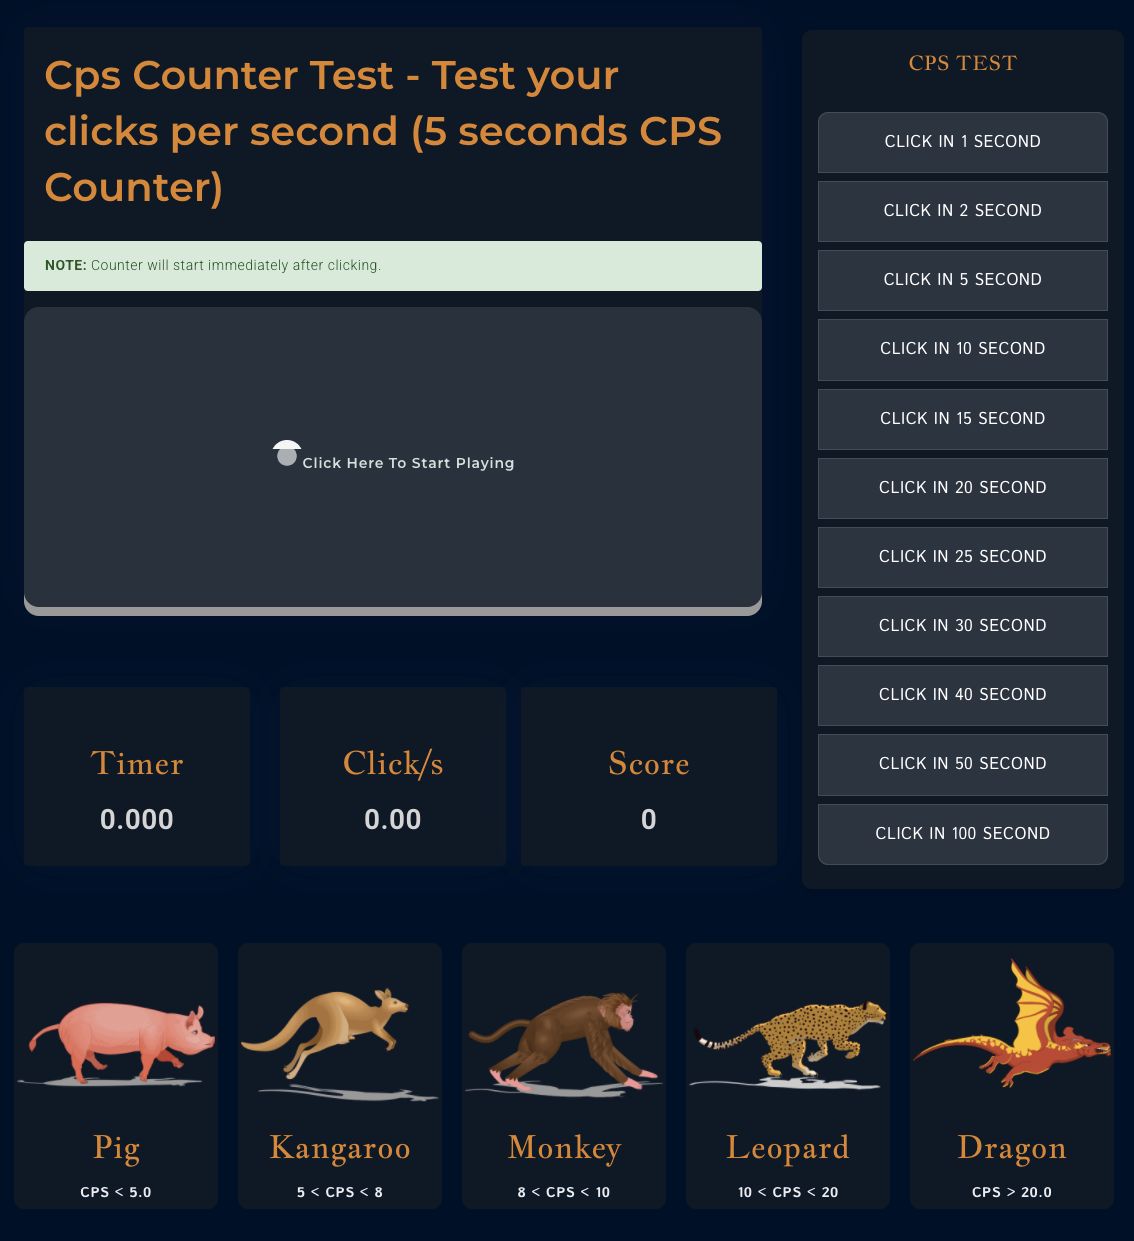 CPS Test - Check your clicks per second